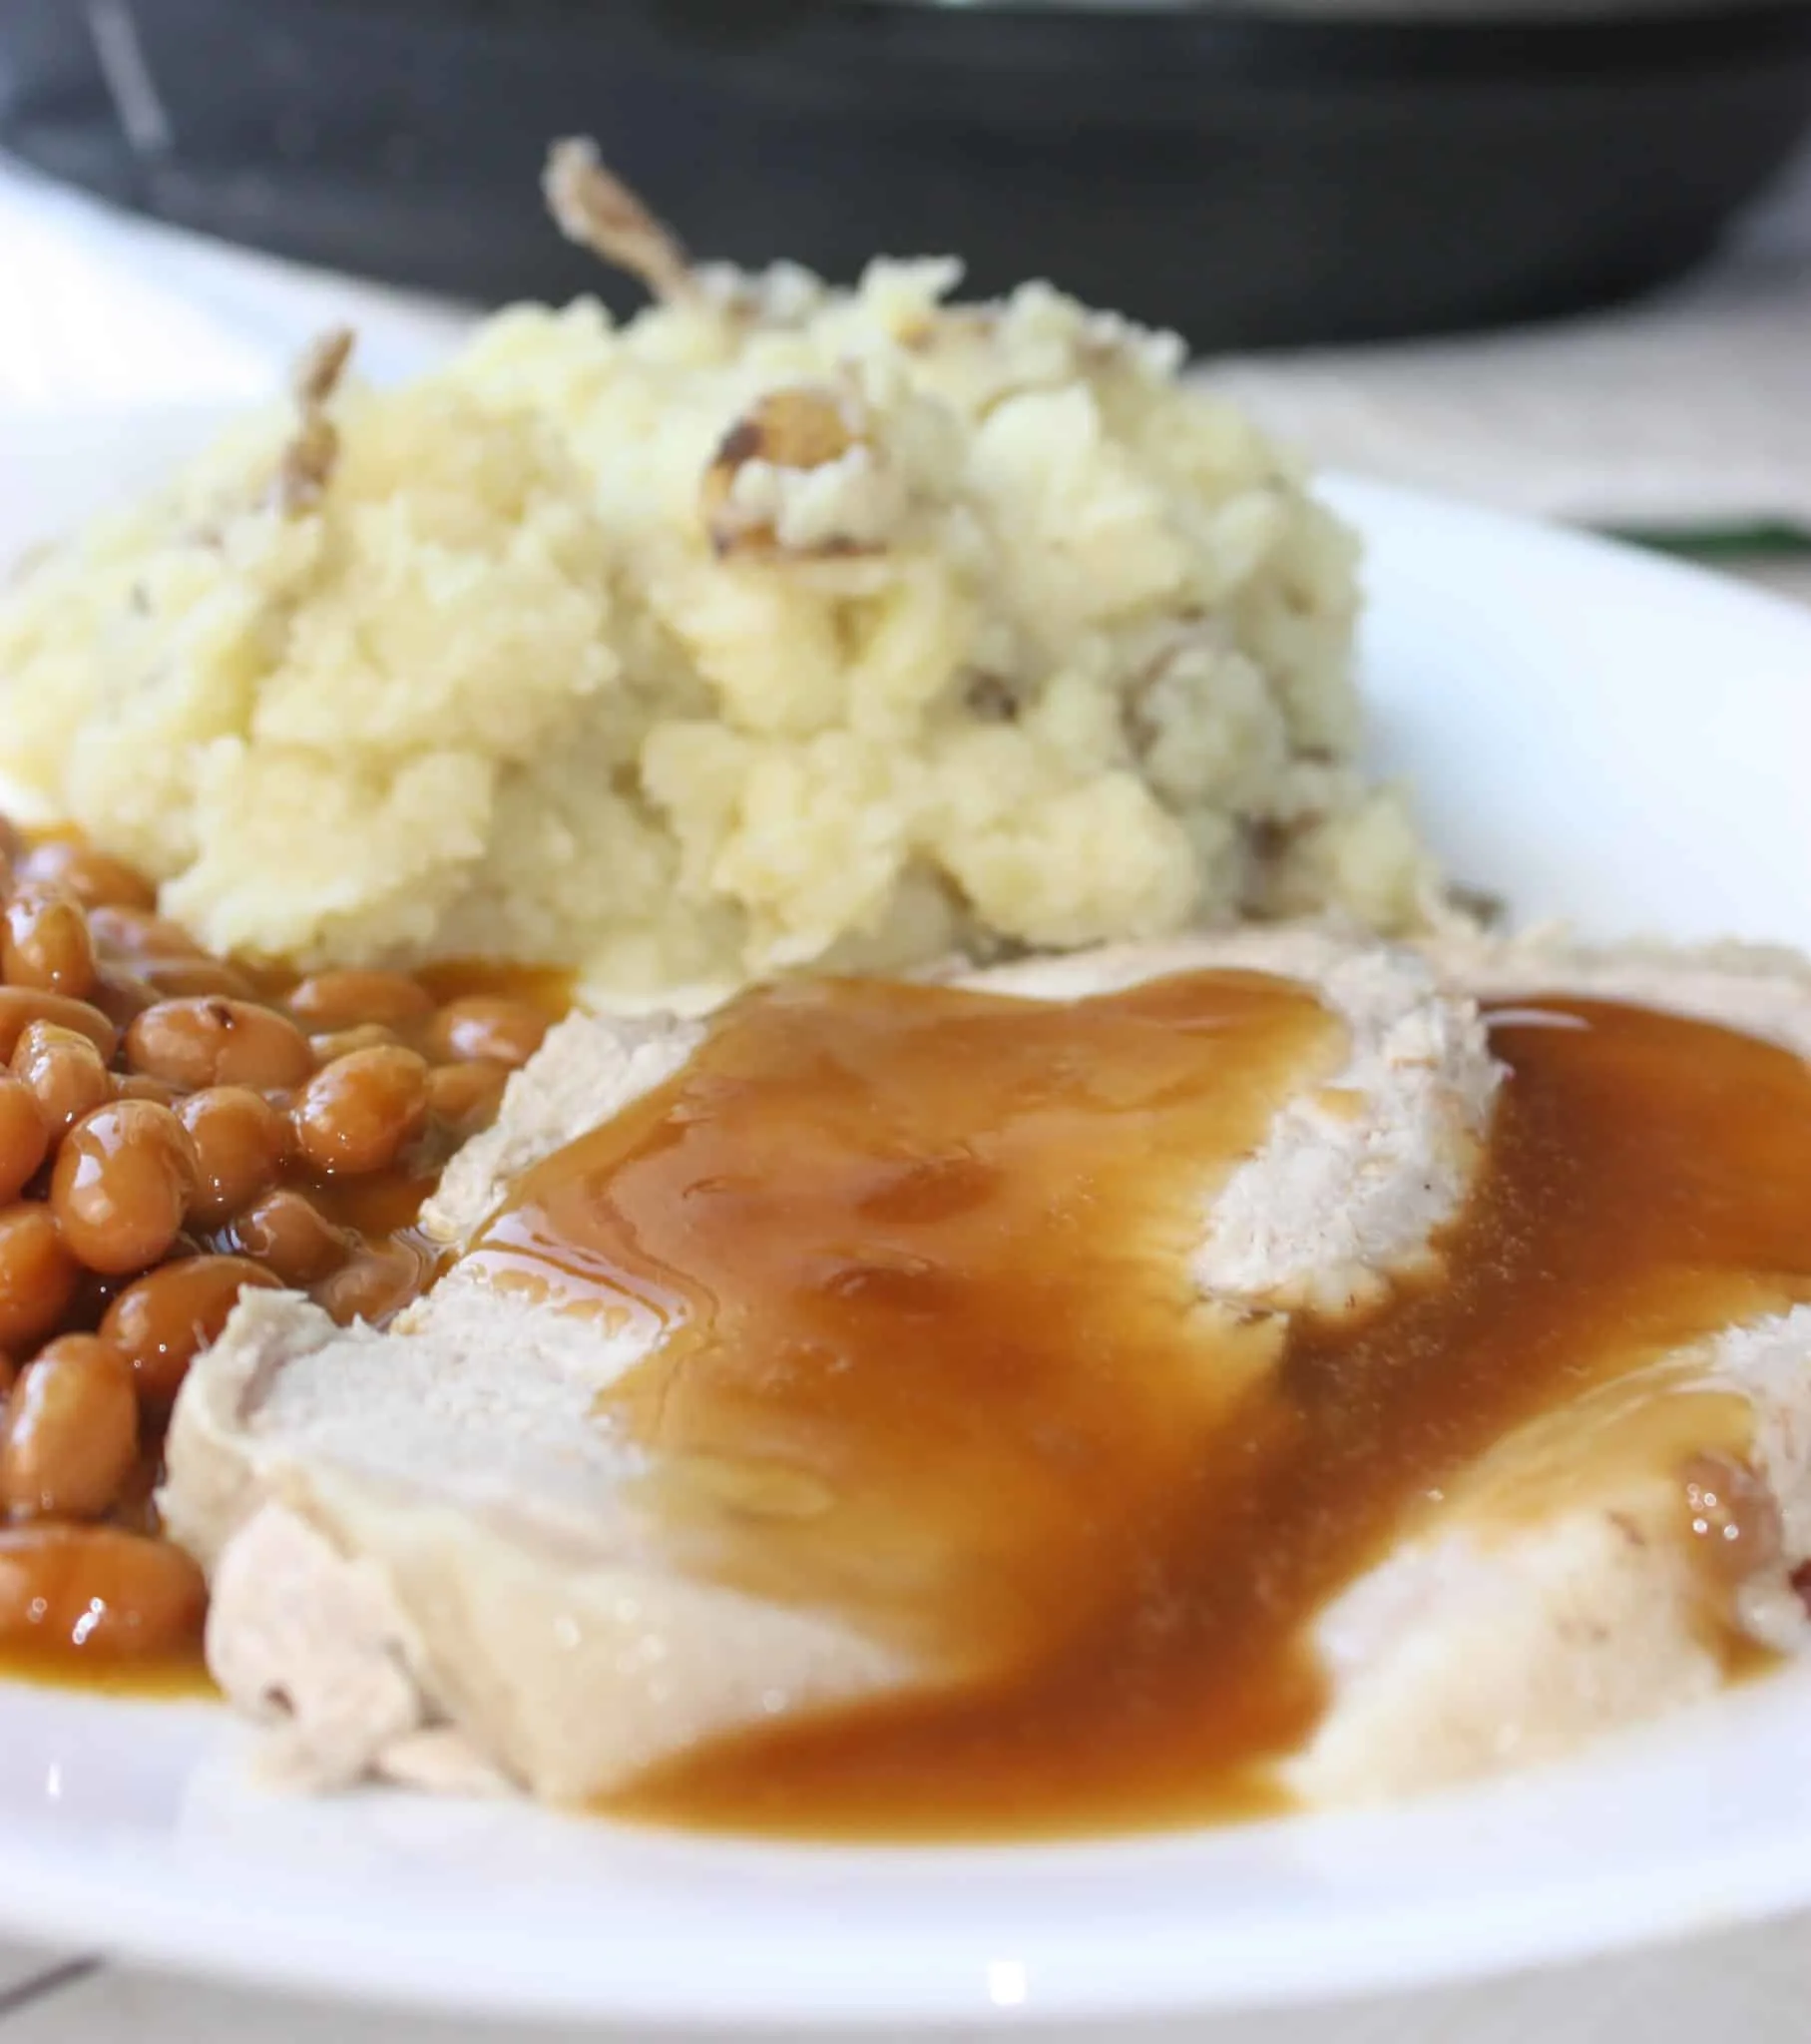 Instant Pot Pork Loin Roast with Garlic Mashed Potatoes is another easy pressure cooker recipe. This roast, flavoured with fall spices, turned out so moist and delicious.